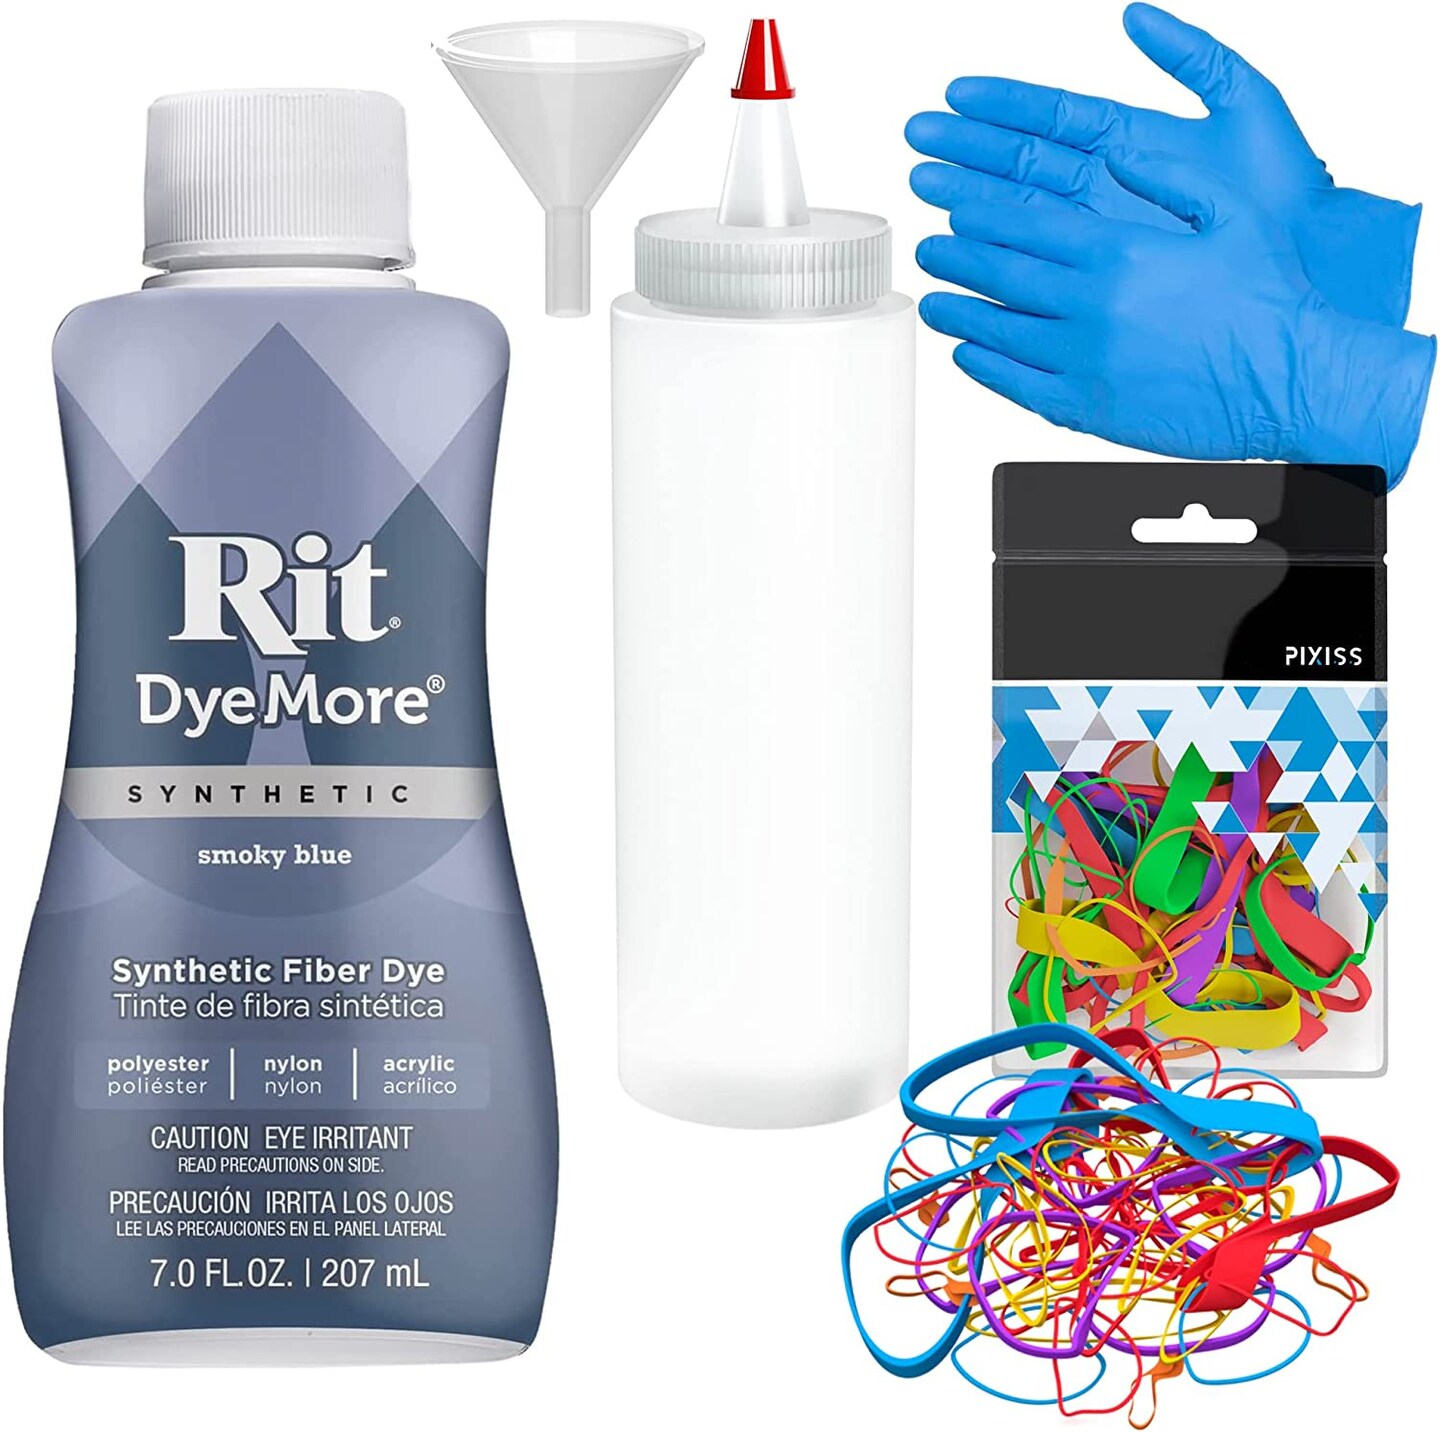 Smoky Blue DyeMore for Synthetics – Rit Dye